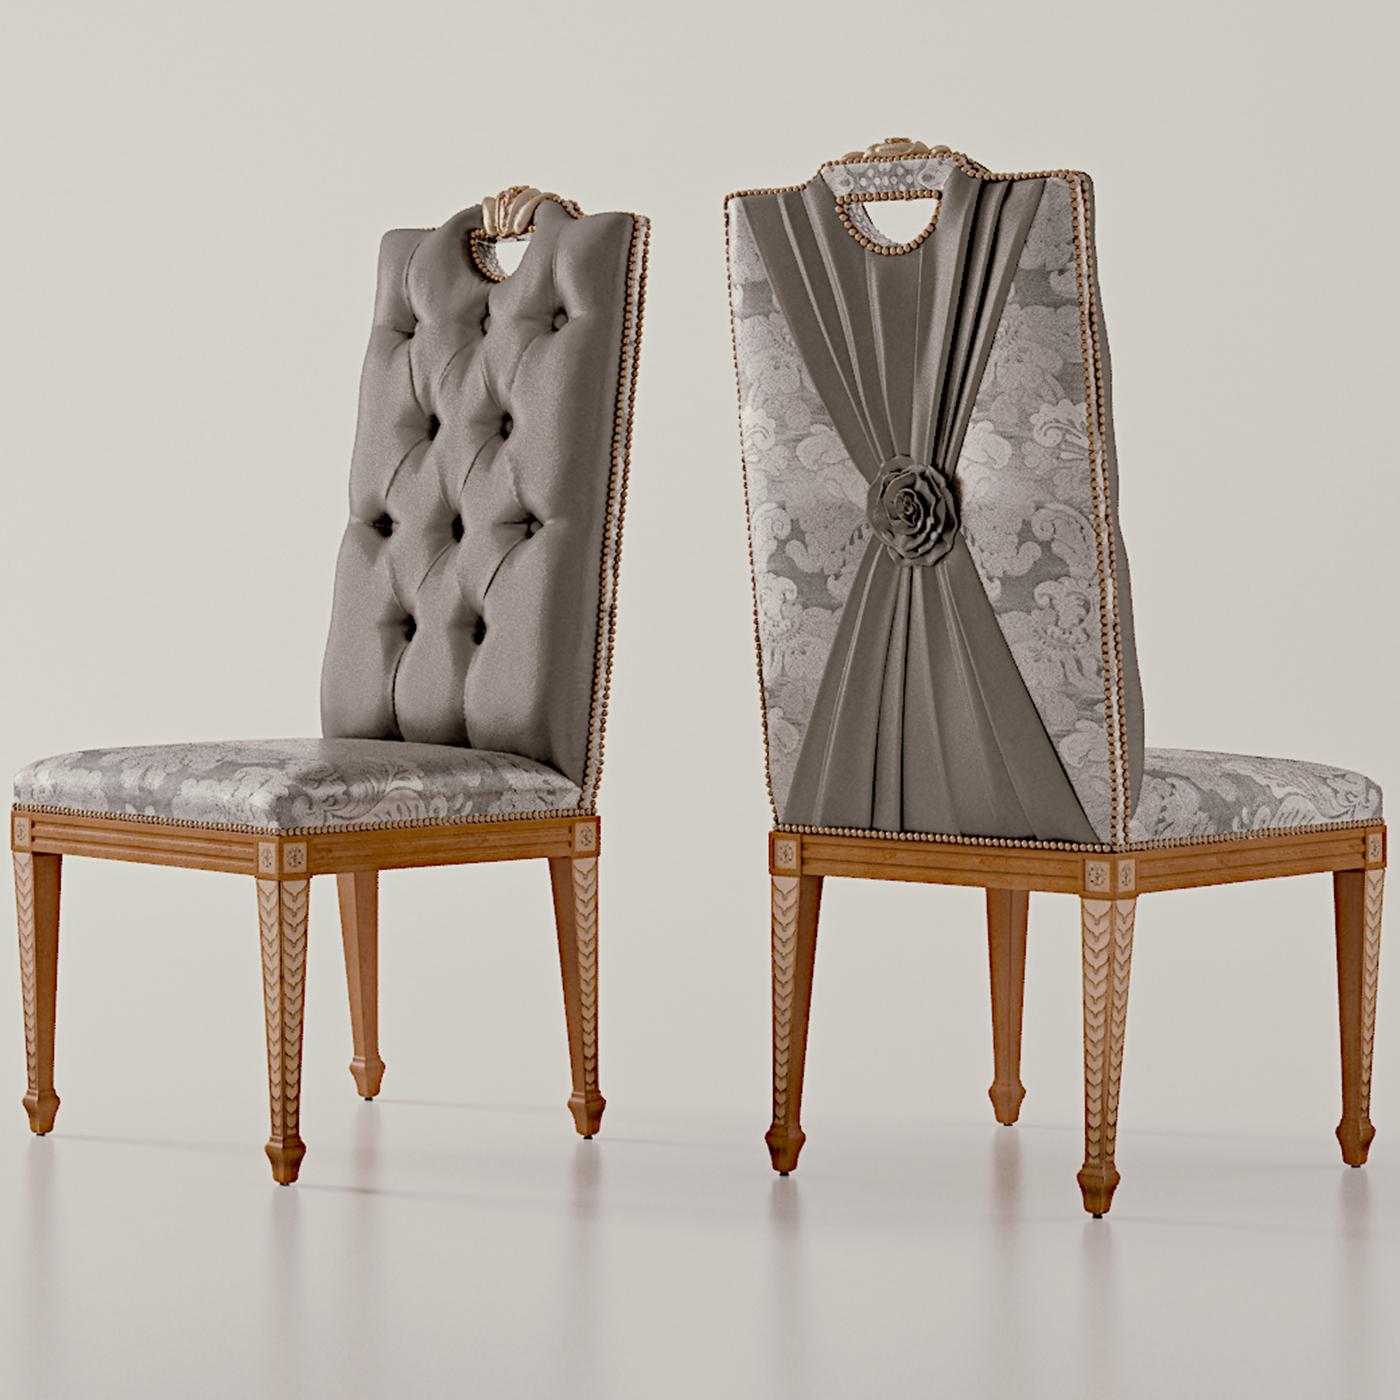 This magnificent chair will create a charming statement around a refined dining table. The chair is entirely crafted of cherry wood, enriched with handmade inlays in maple, mother of pearl, and mecca silver leaf. The backrest is tufted on the front